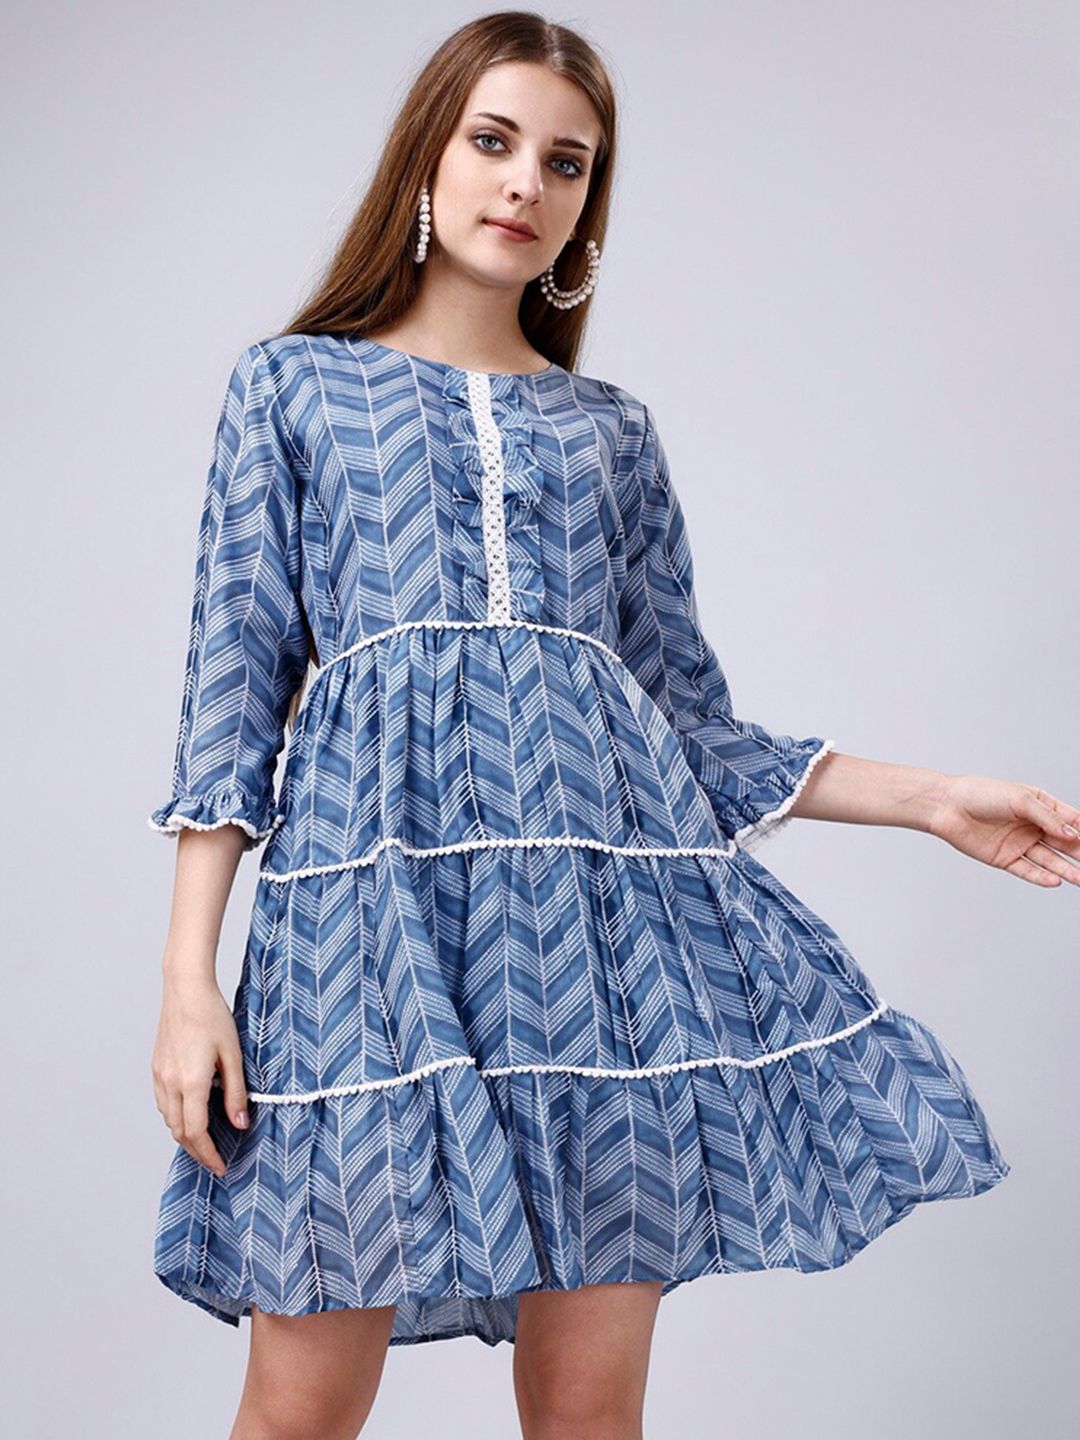 GoStyle Printed Cotton Flared Dress Price in India